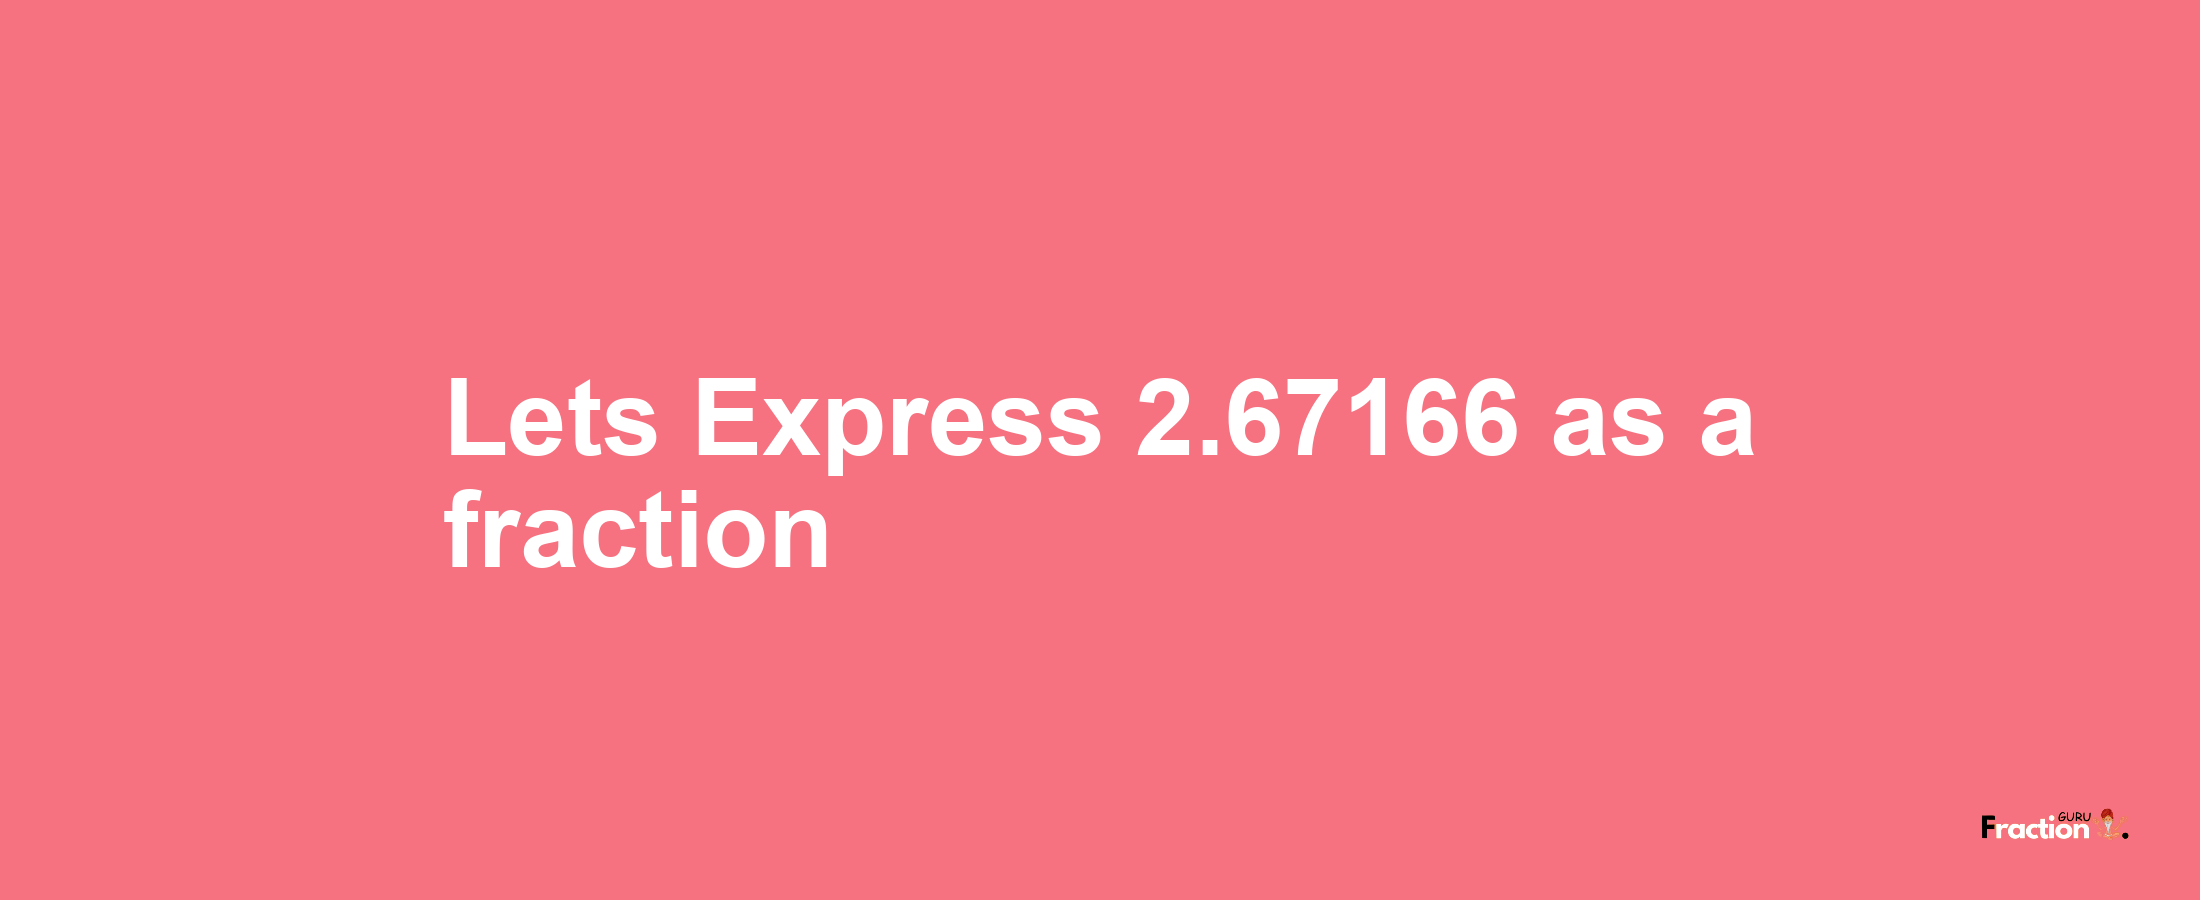 Lets Express 2.67166 as afraction